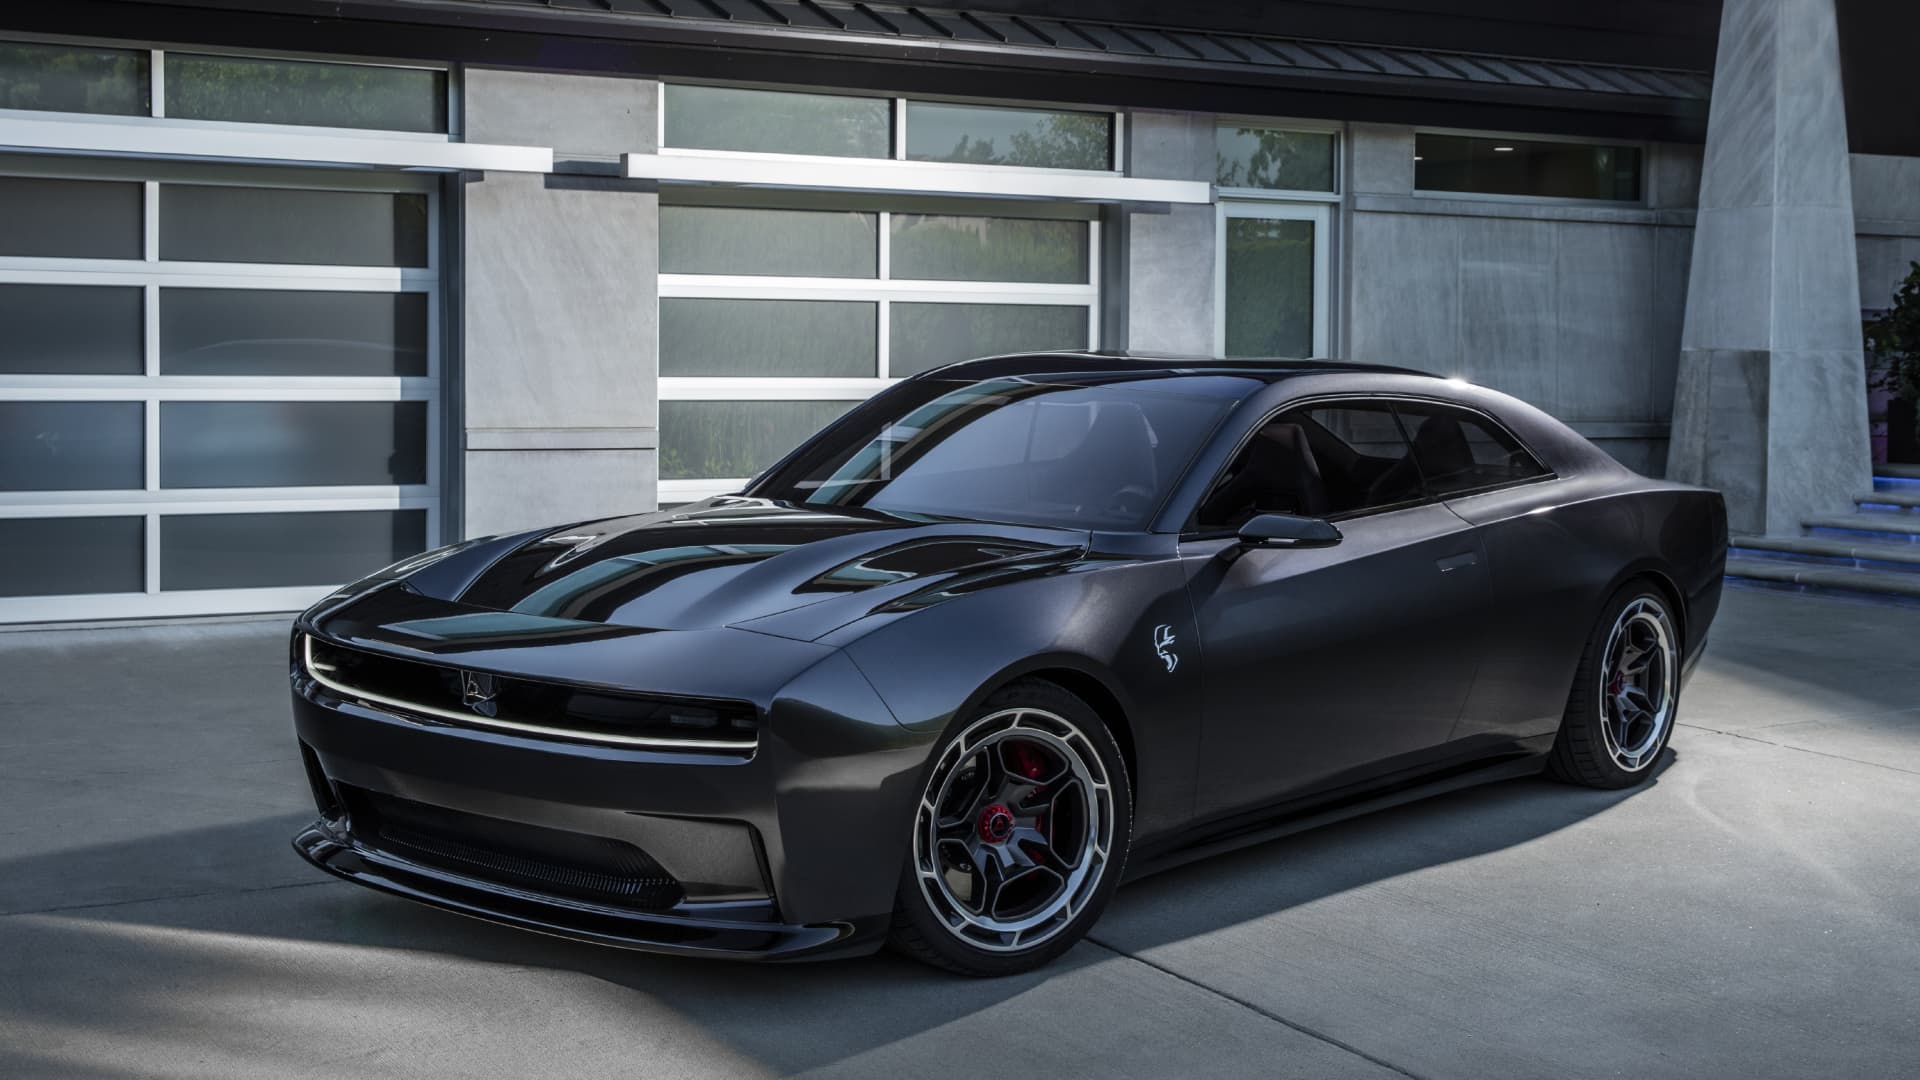 Dodge unveils new electric muscle car concept that could replace the Challenger and Charger Auto Recent